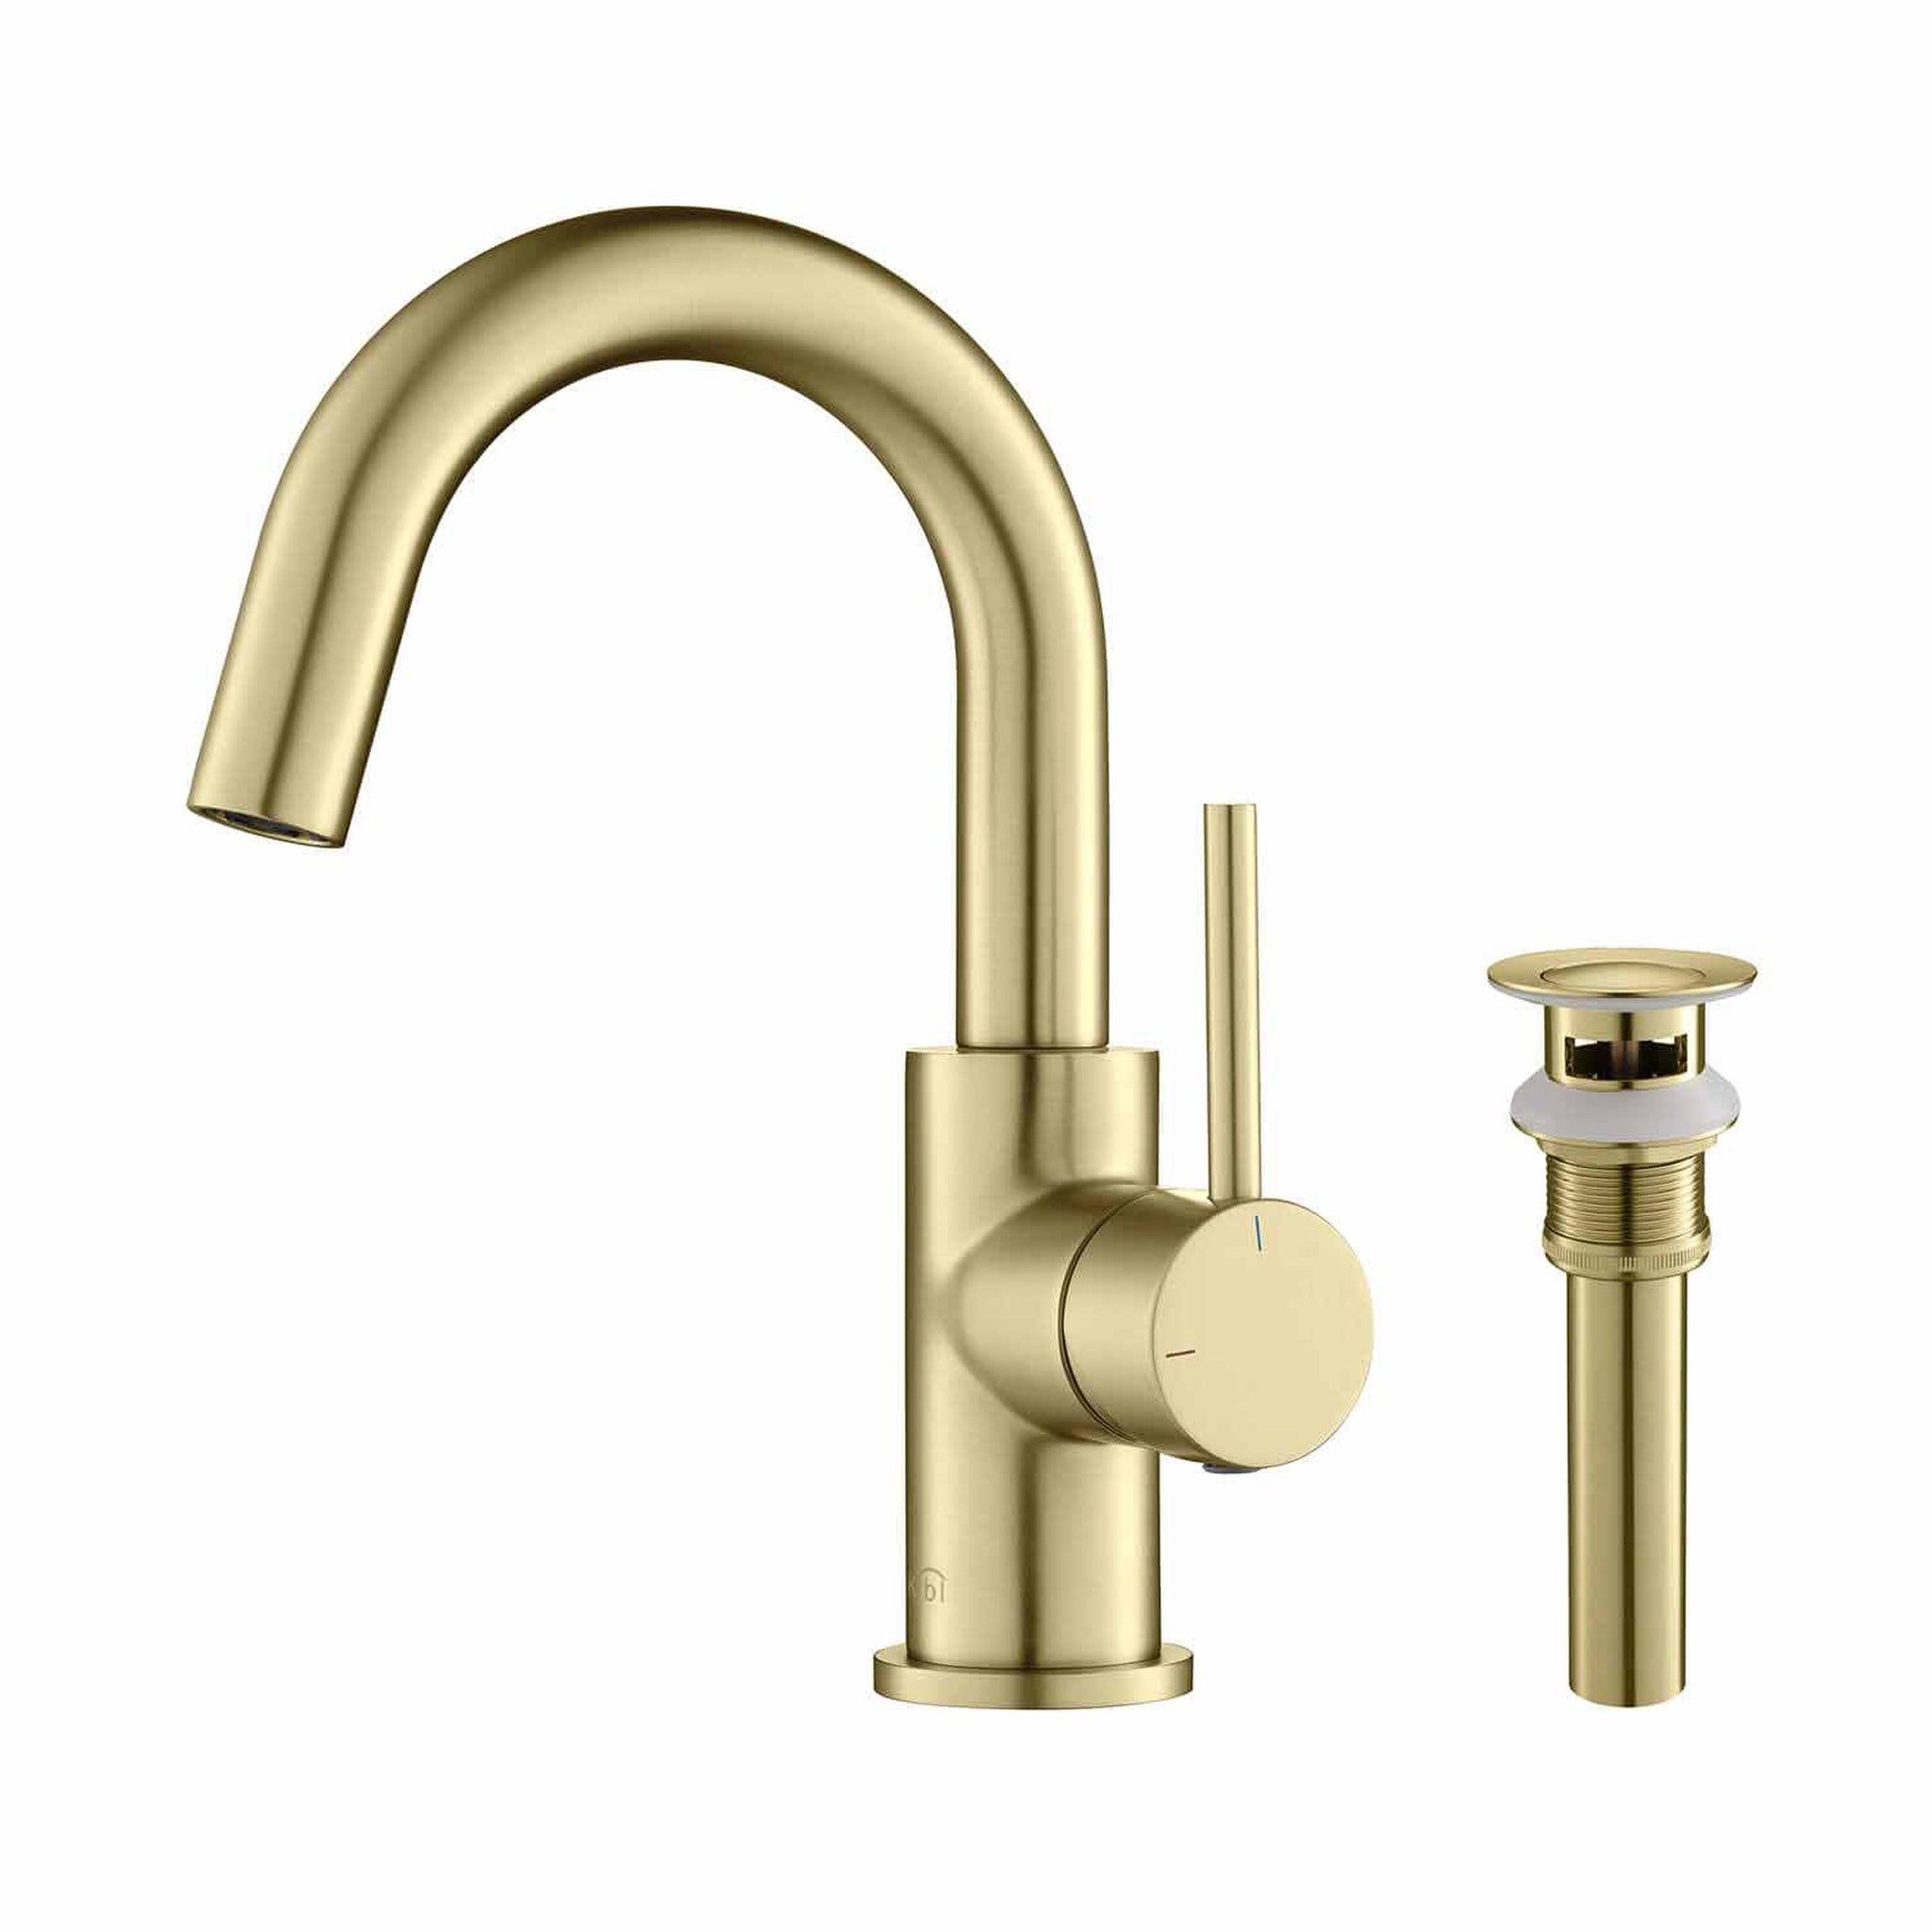 KIBI, KIBI Circular High-Arc Single Handle Brushed Gold Solid Brass Bathroom Sink Faucet With Pop-Up Drain Stopper Small Cover With Overflow